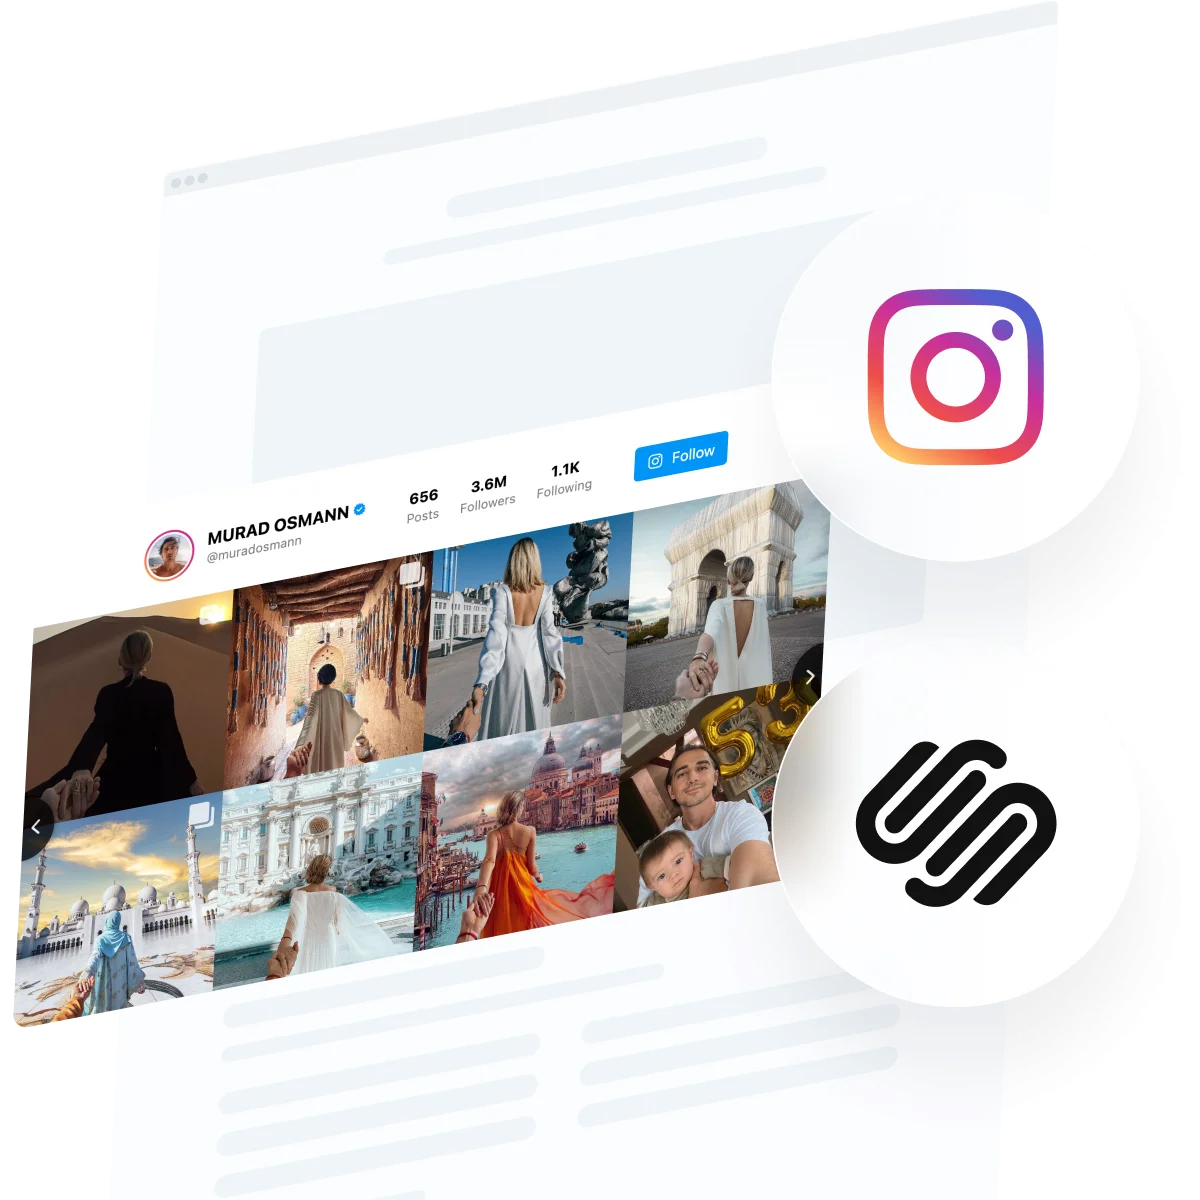 How to Add Instagram Feed to Squarespace